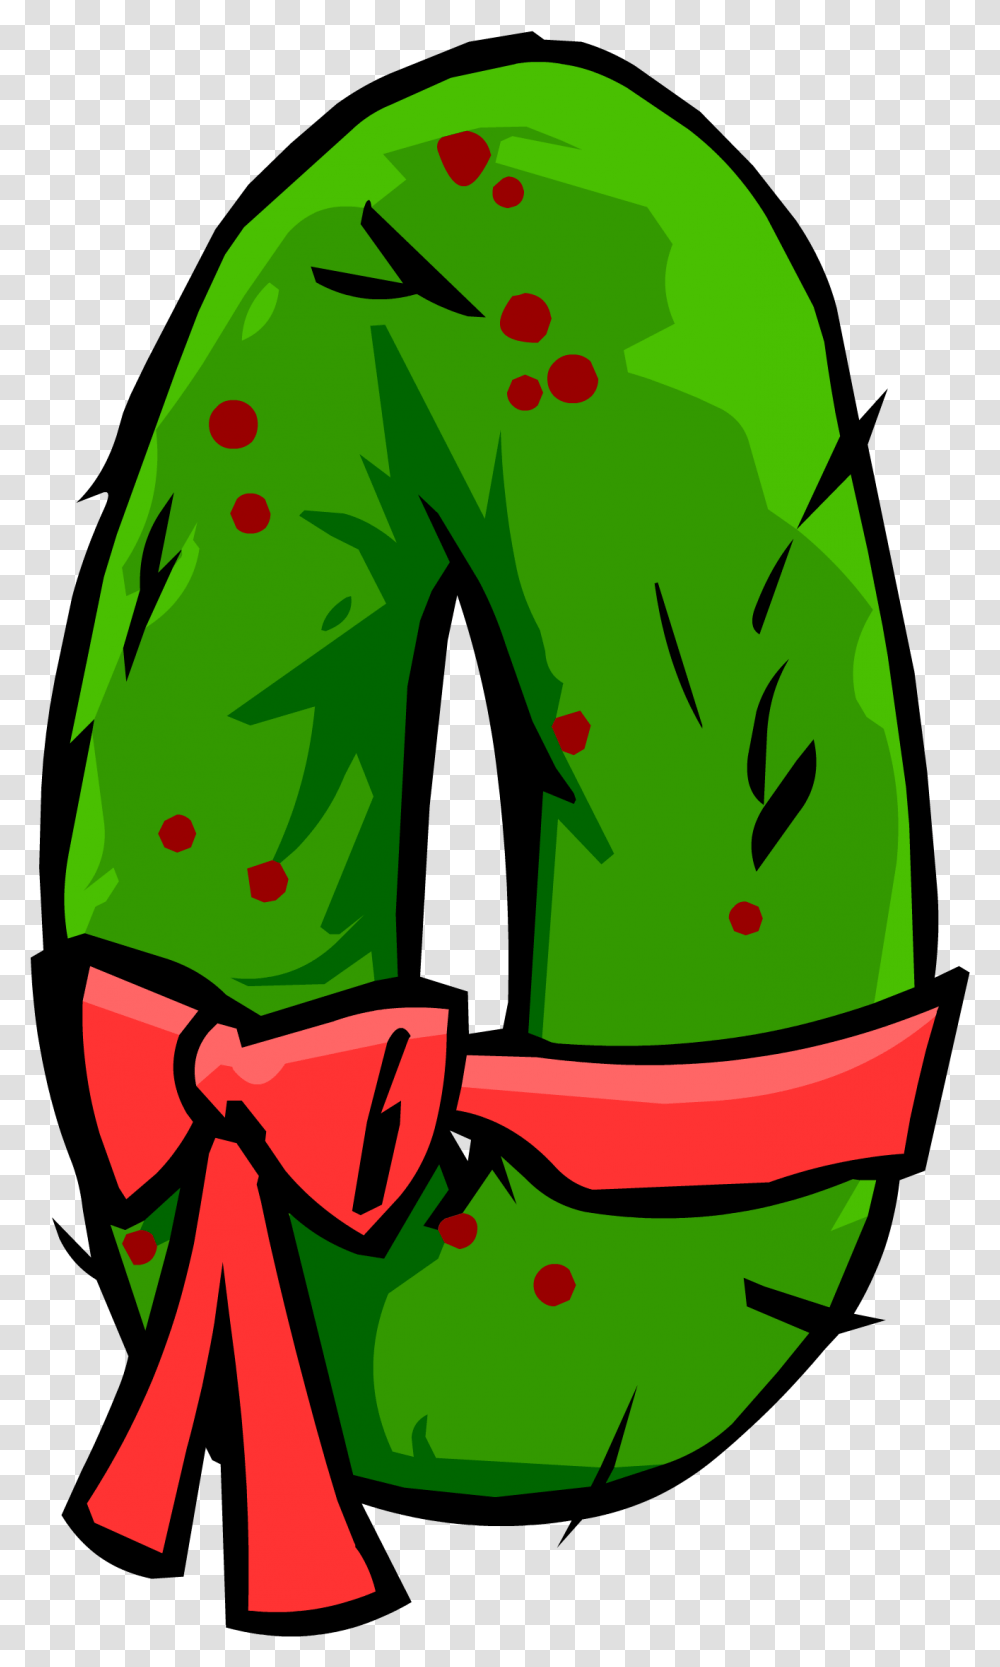 Download Hd Christmas Wreath Sprite 003 Wreath Wreath, Plant, Text, Produce, Food Transparent Png